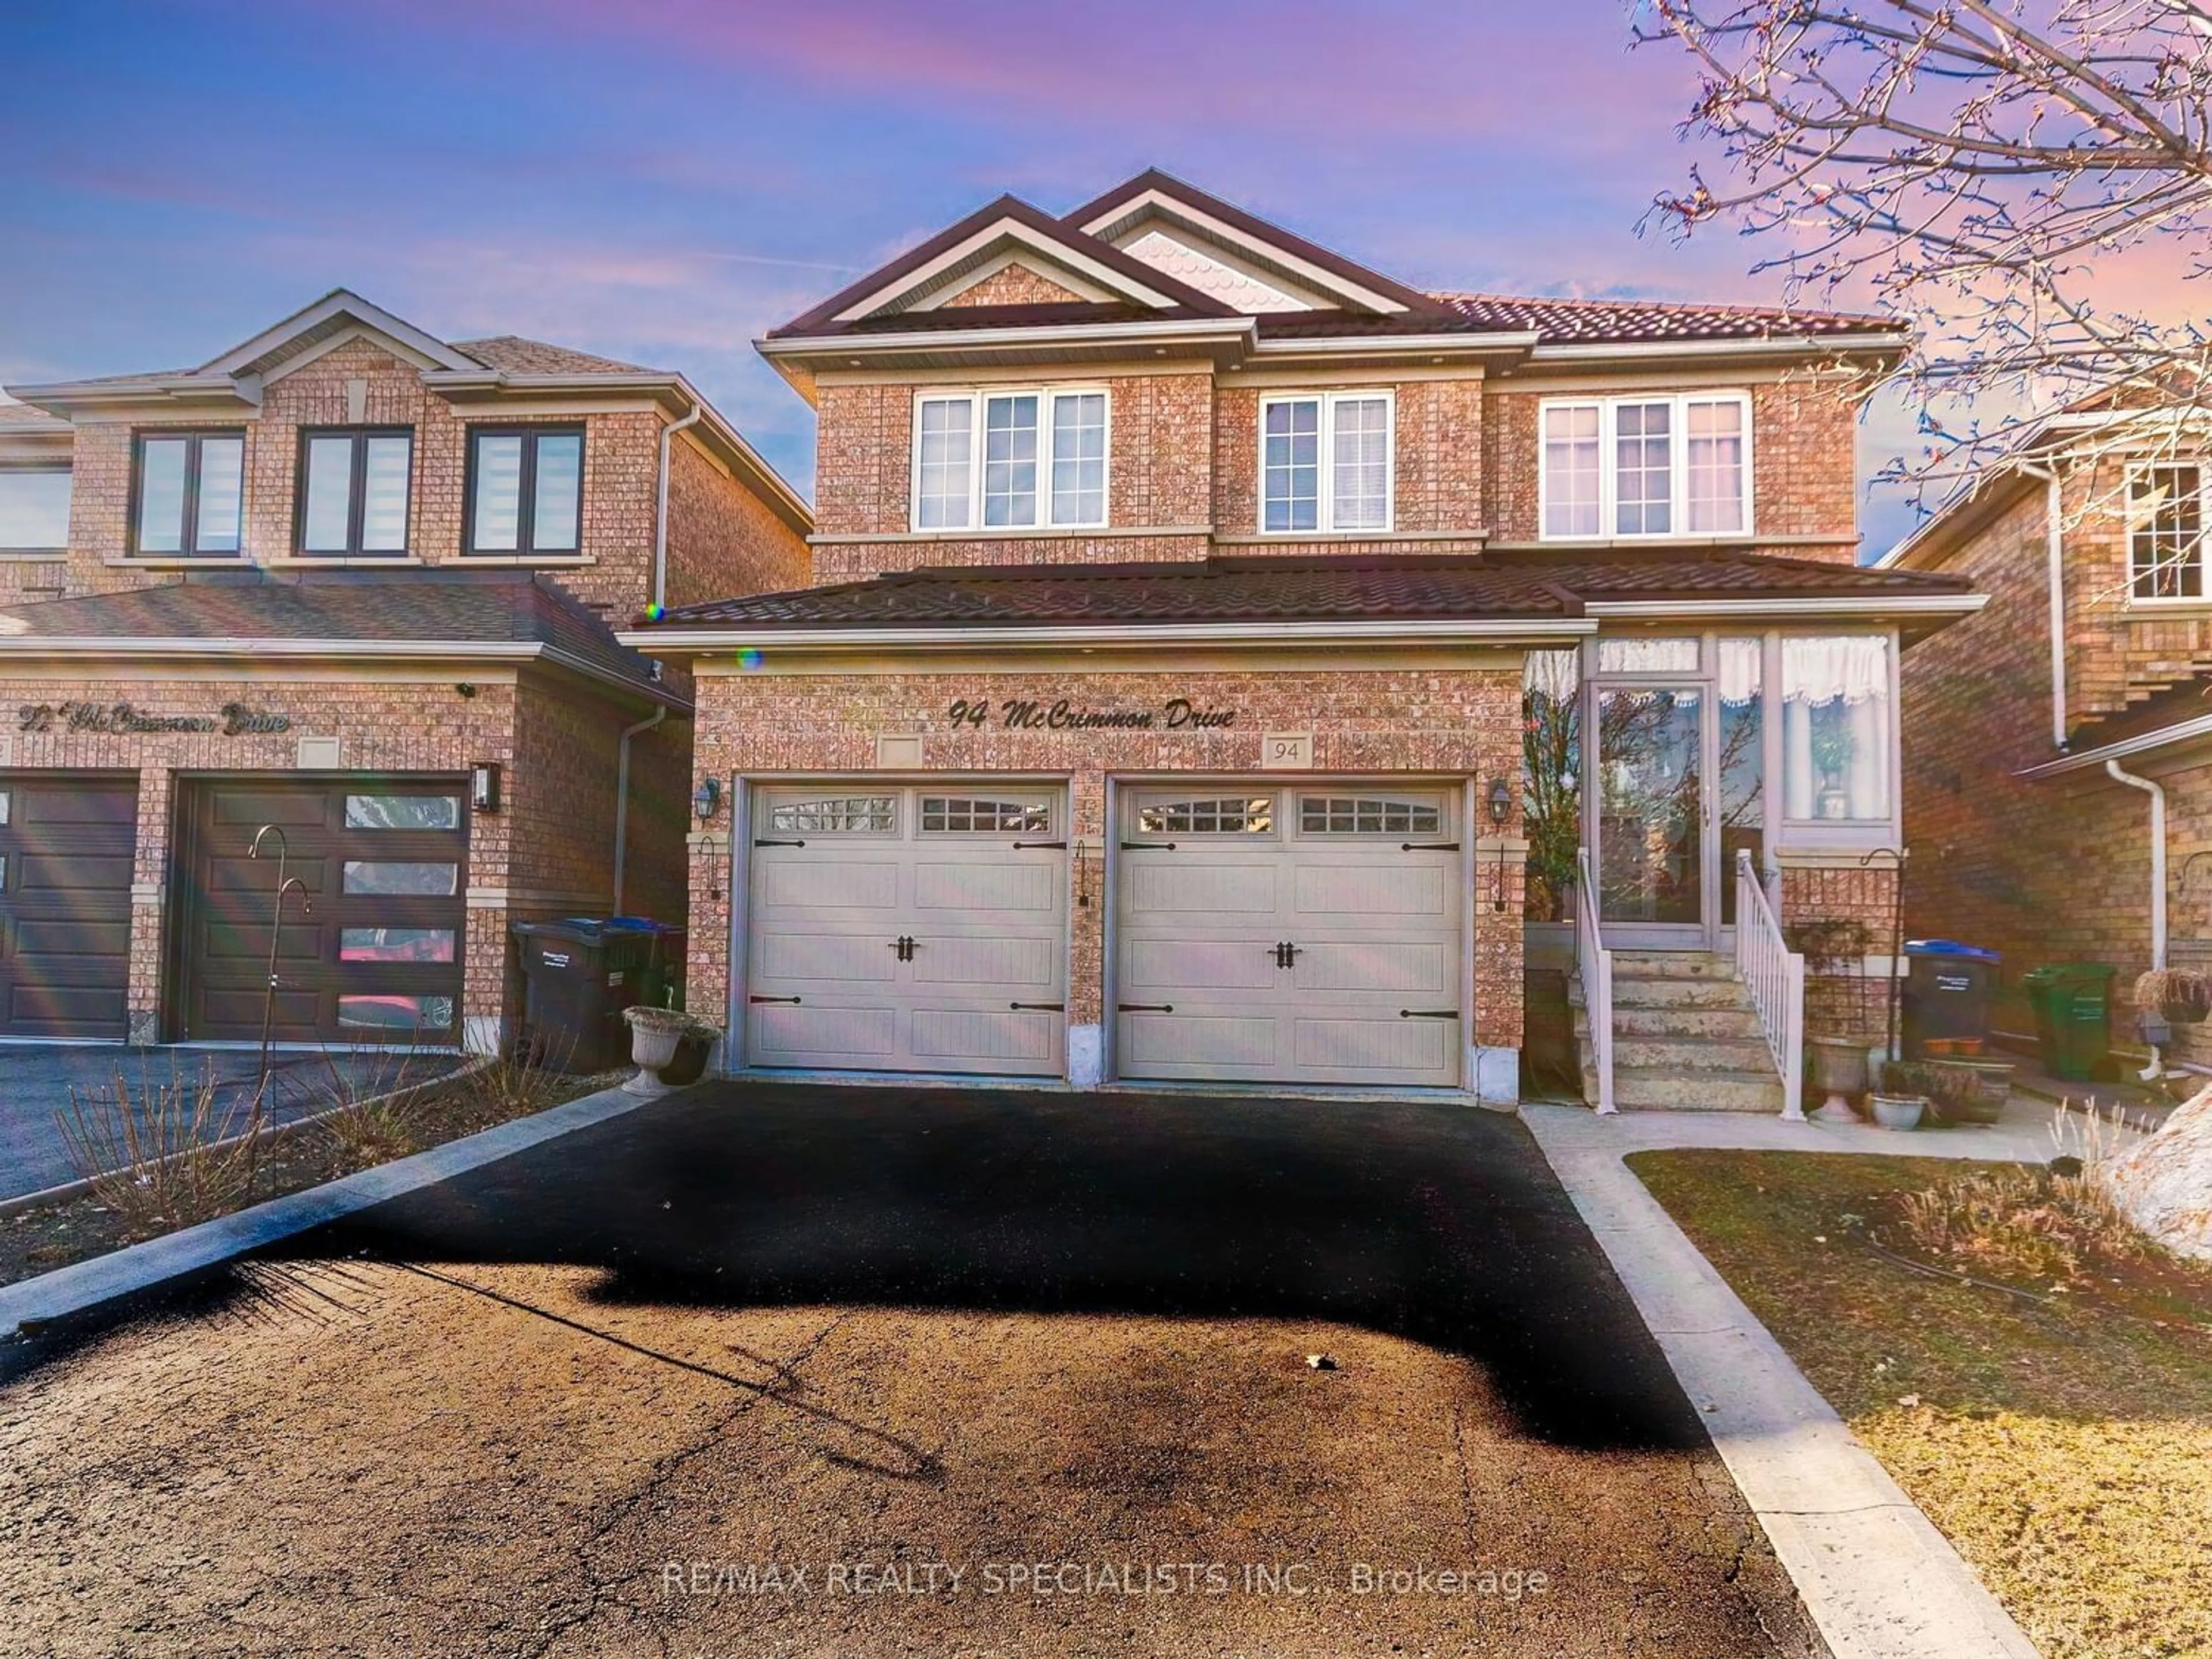 Home with brick exterior material for 94 Mccrimmon Dr, Brampton Ontario L7A 2Z6